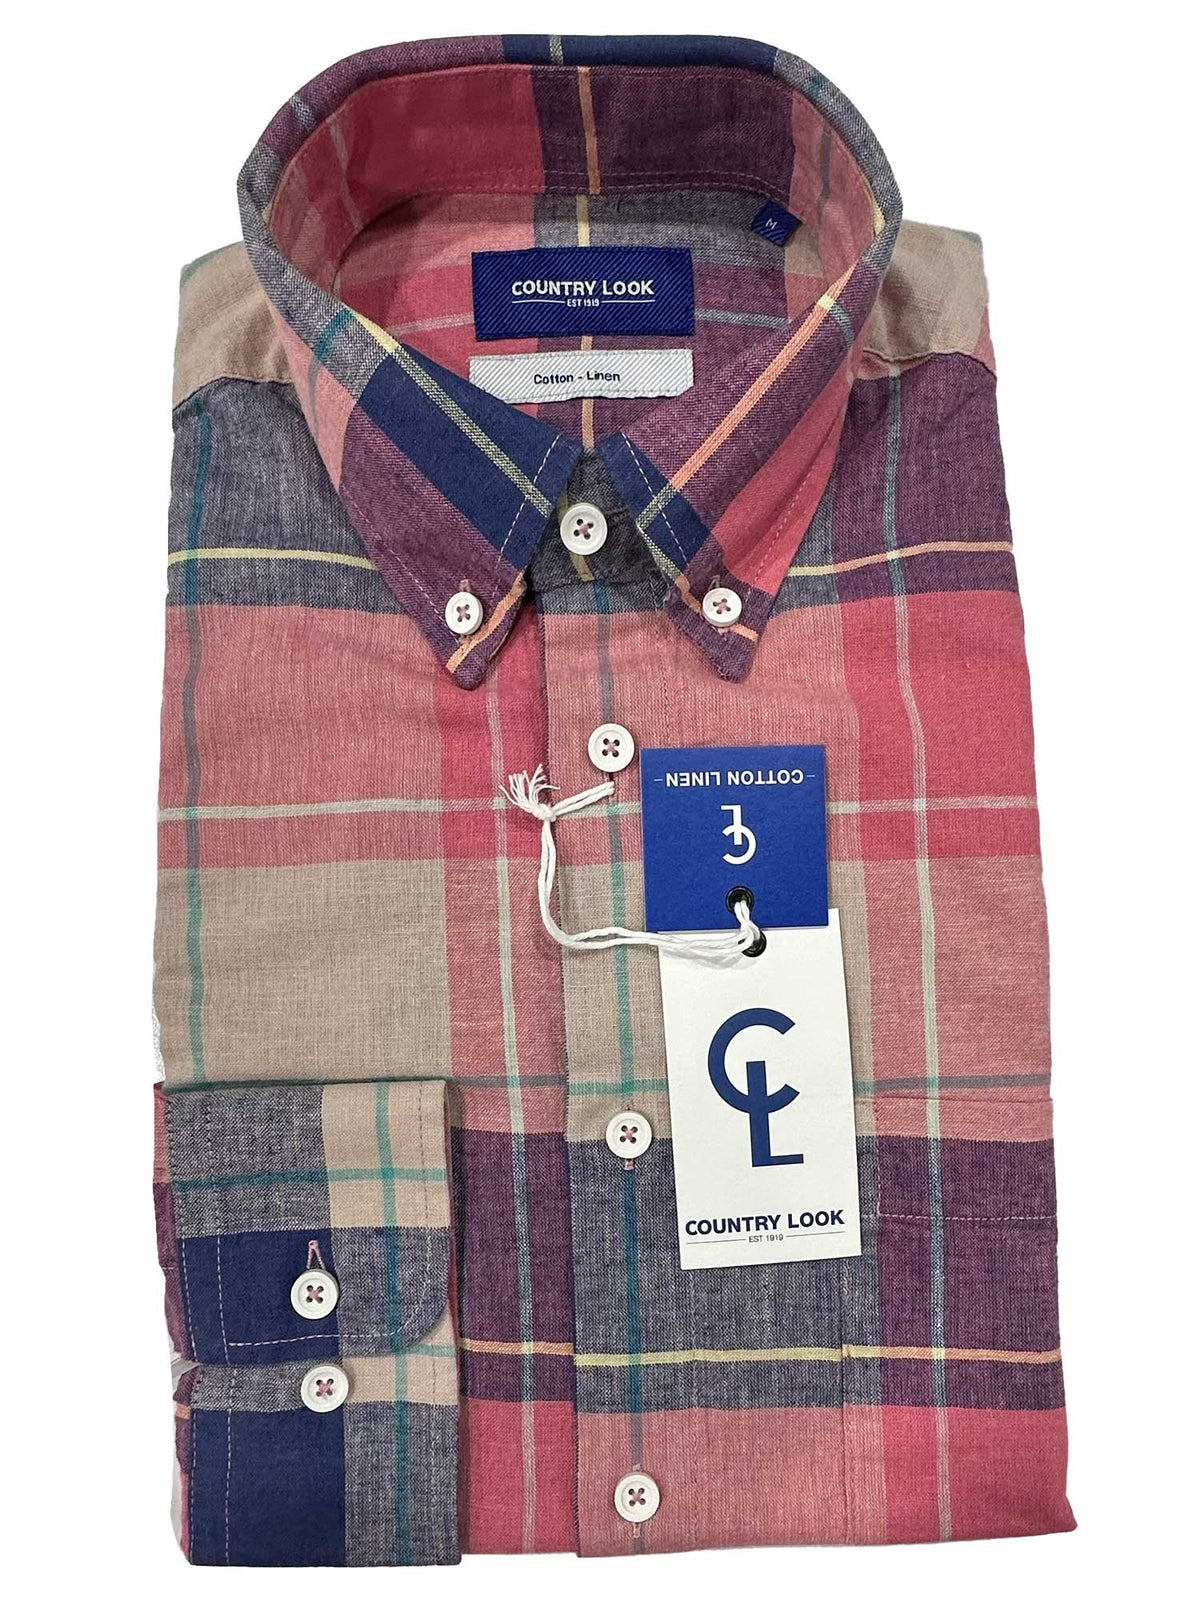 Galway Shirt-FYQ144  https://harrysformenswear.com.au/products/galway-shirt-fyq144  Comfortable Galway Shirt-FYQ144. Cotton and linen blend for a cool, natural style. Machine-washable, functional front pocket. Modern fit.